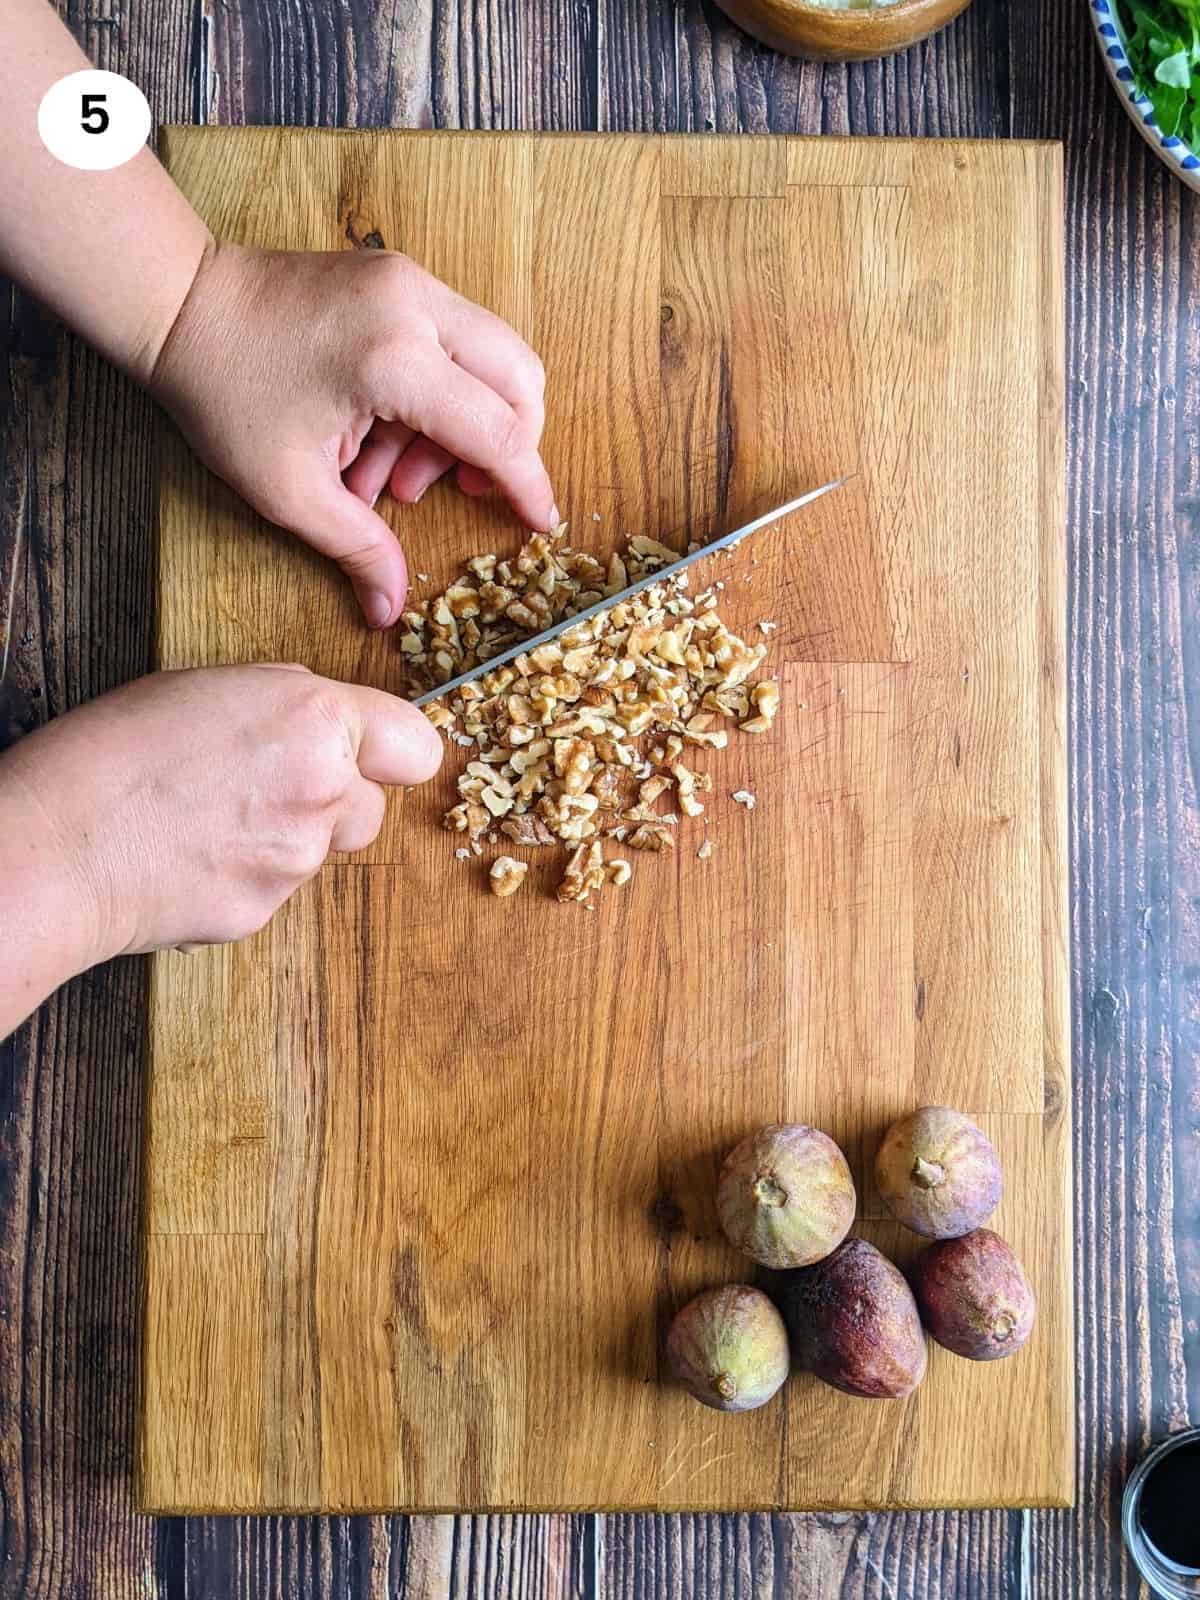 Chopping the walnuts coarsely.